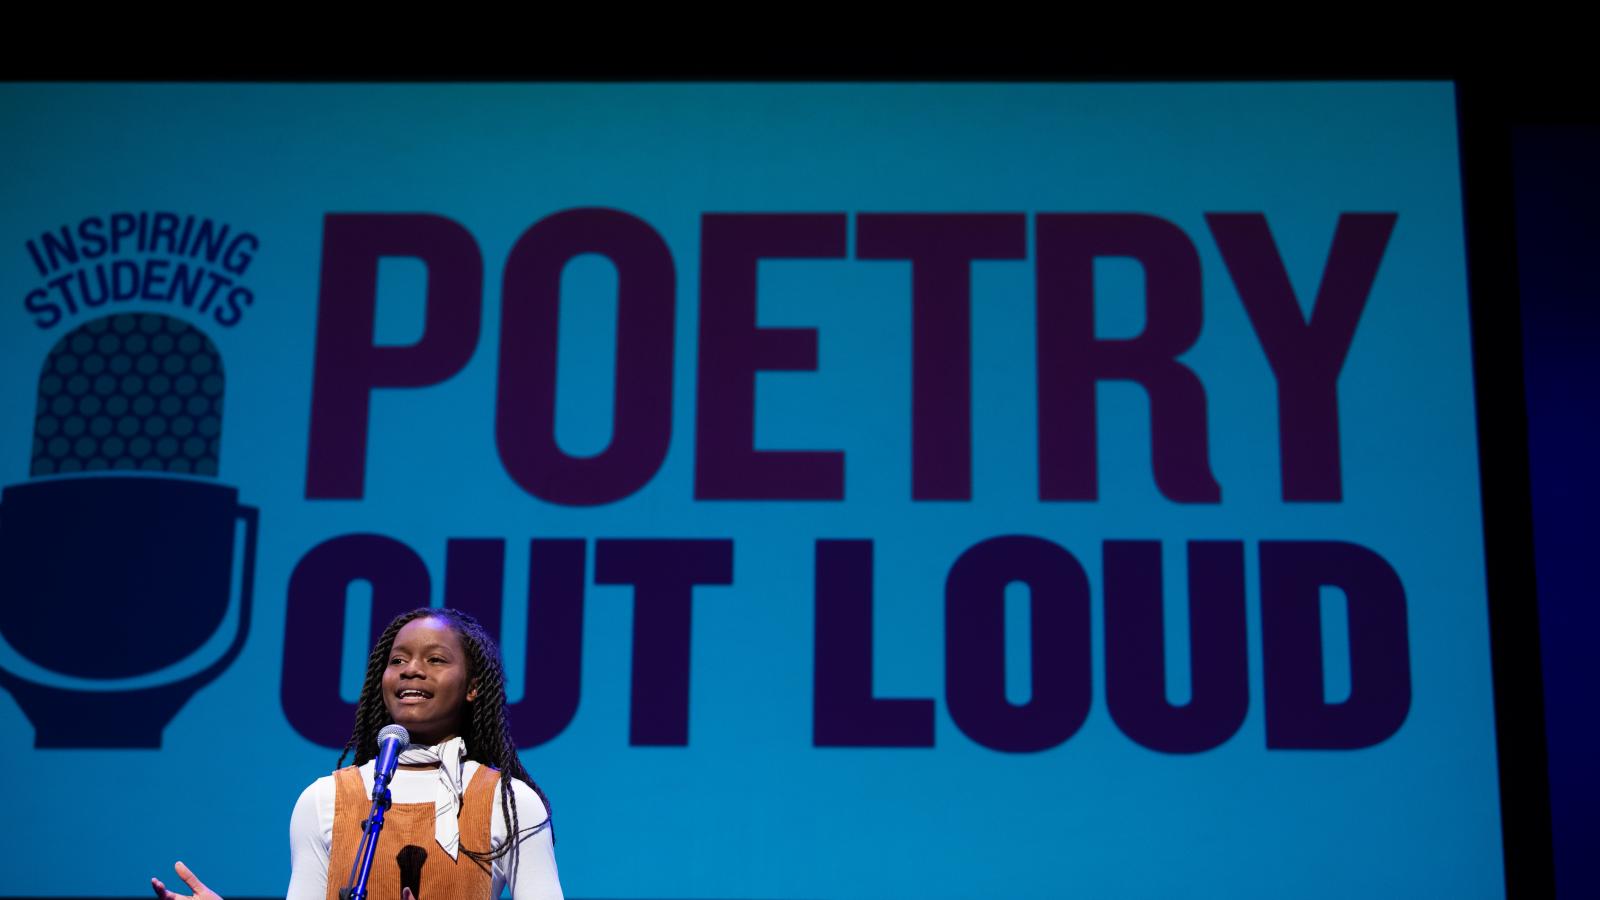 A young woman speaks at a microphone with the Poetry Out Loud logo on a screen behind her.